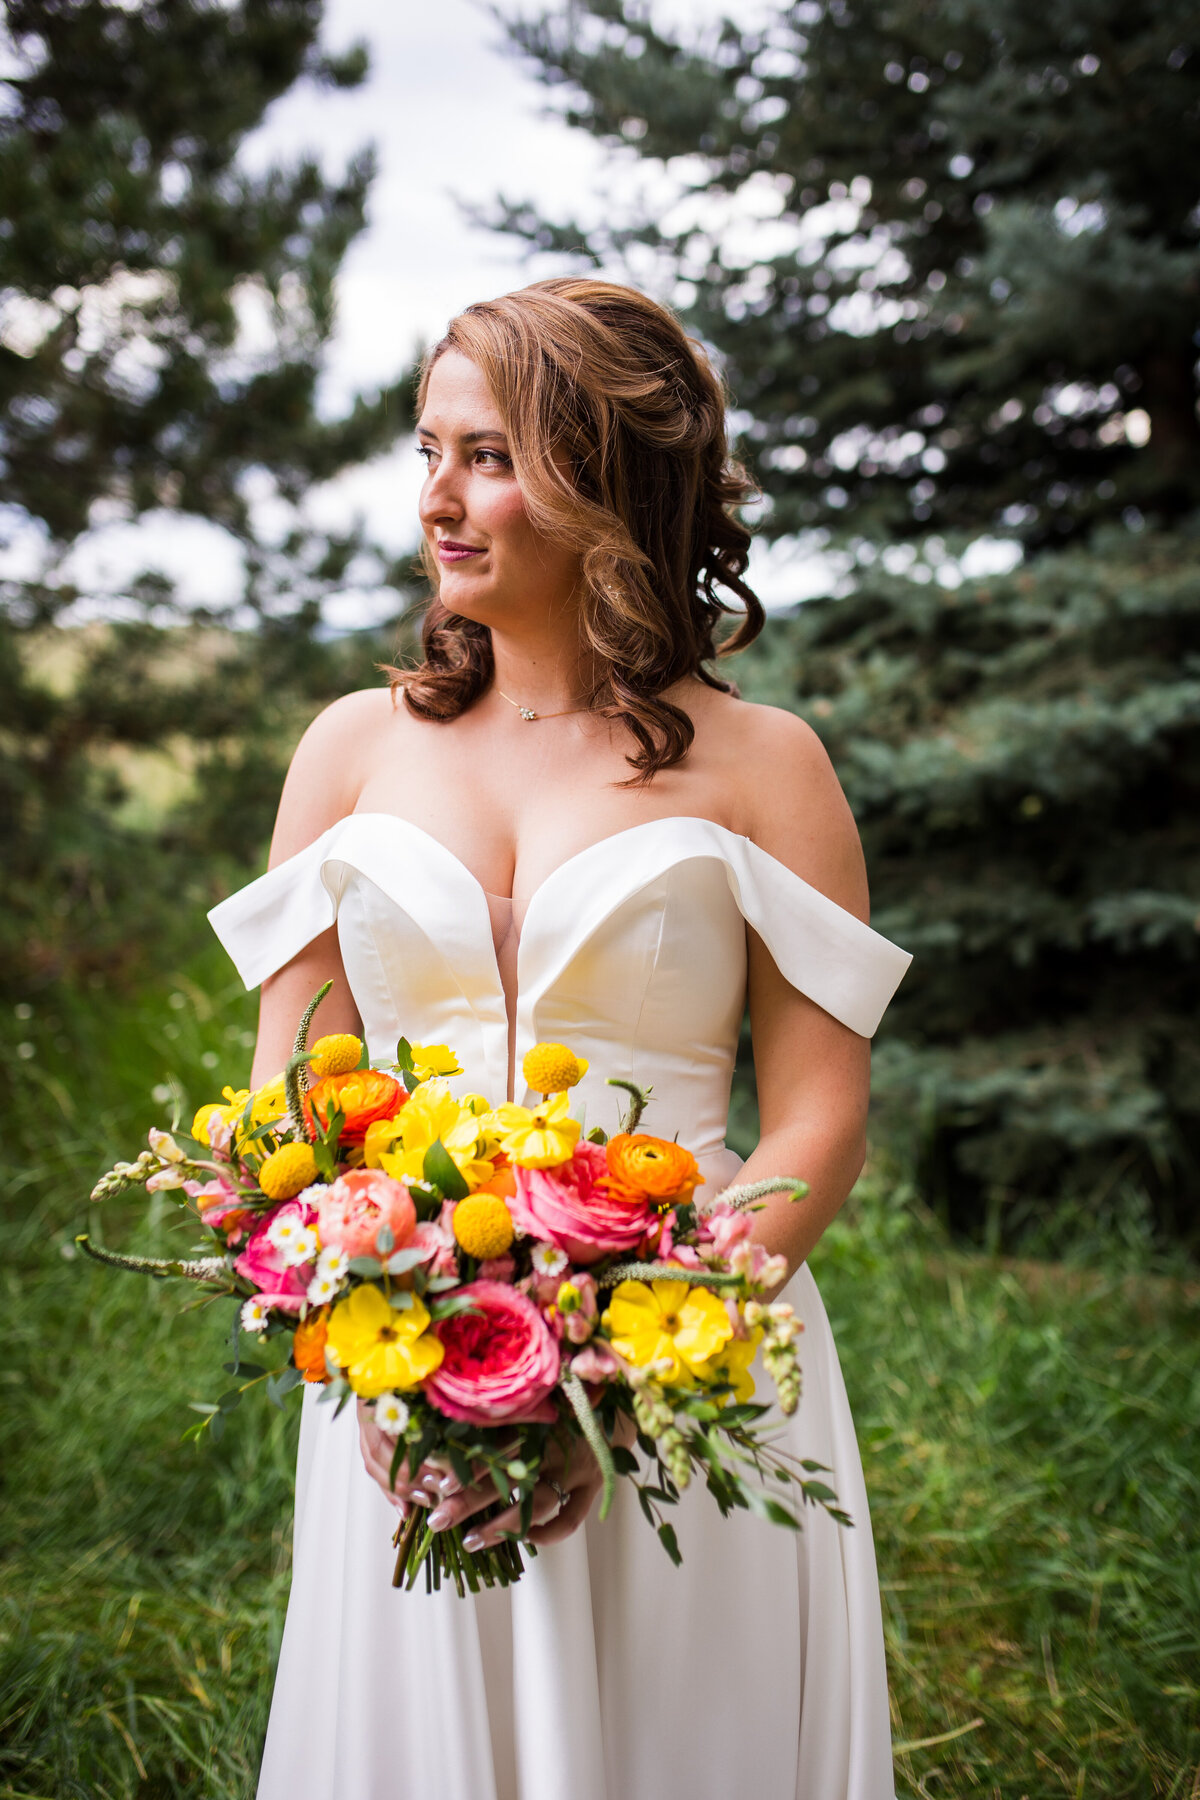 A bride stares off camera with a soft smile on her face, holding her vibrant summertime bouquet.